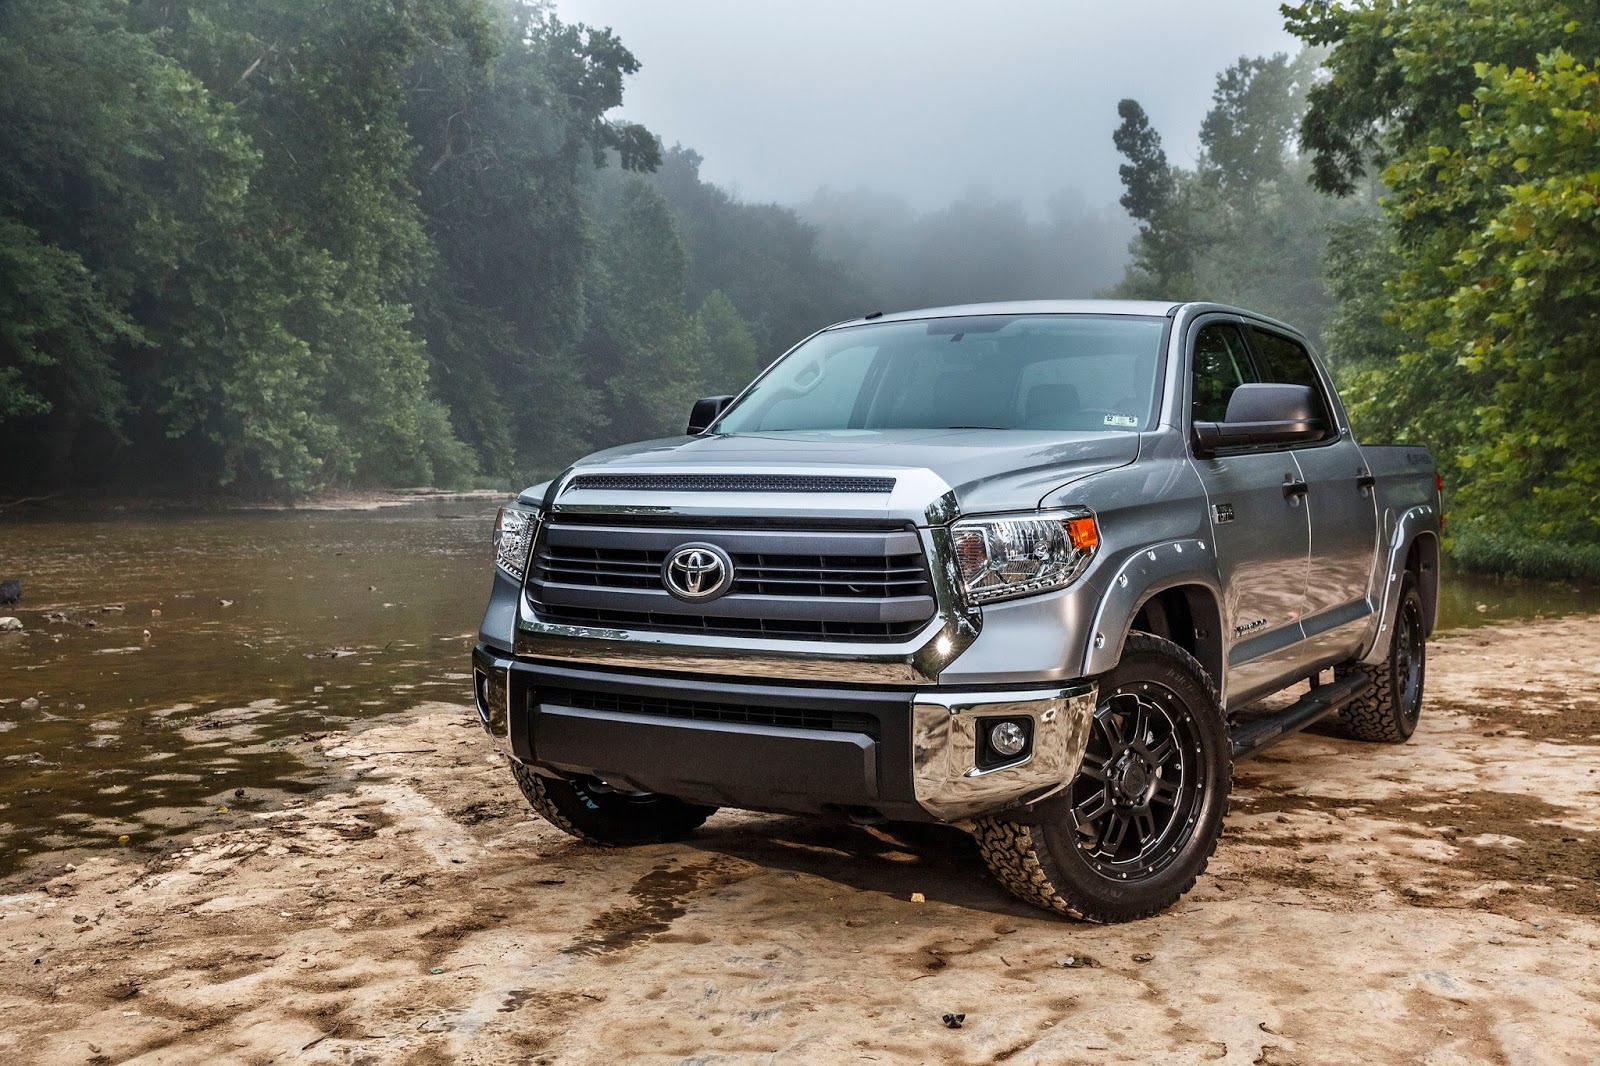 935 Popular How much is a 2015 toyota tundra worth for wallpaper